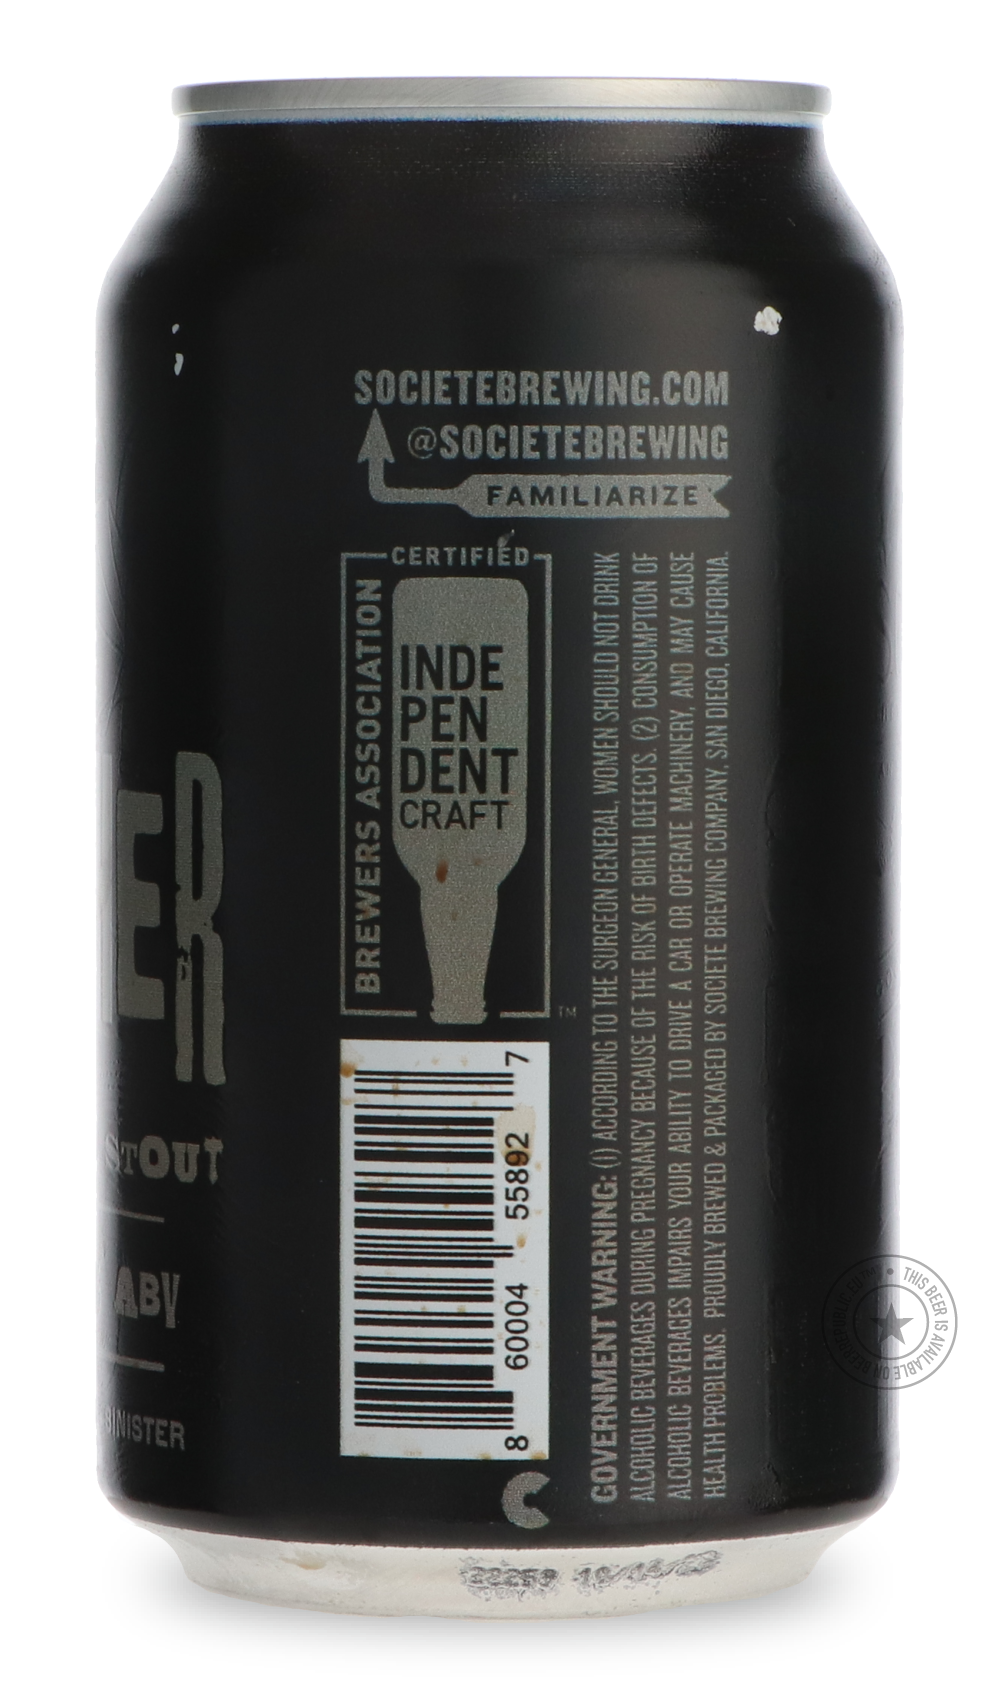 -Societe- The Butcher-Stout & Porter- Only @ Beer Republic - The best online beer store for American & Canadian craft beer - Buy beer online from the USA and Canada - Bier online kopen - Amerikaans bier kopen - Craft beer store - Craft beer kopen - Amerikanisch bier kaufen - Bier online kaufen - Acheter biere online - IPA - Stout - Porter - New England IPA - Hazy IPA - Imperial Stout - Barrel Aged - Barrel Aged Imperial Stout - Brown - Dark beer - Blond - Blonde - Pilsner - Lager - Wheat - Weizen - Amber - 